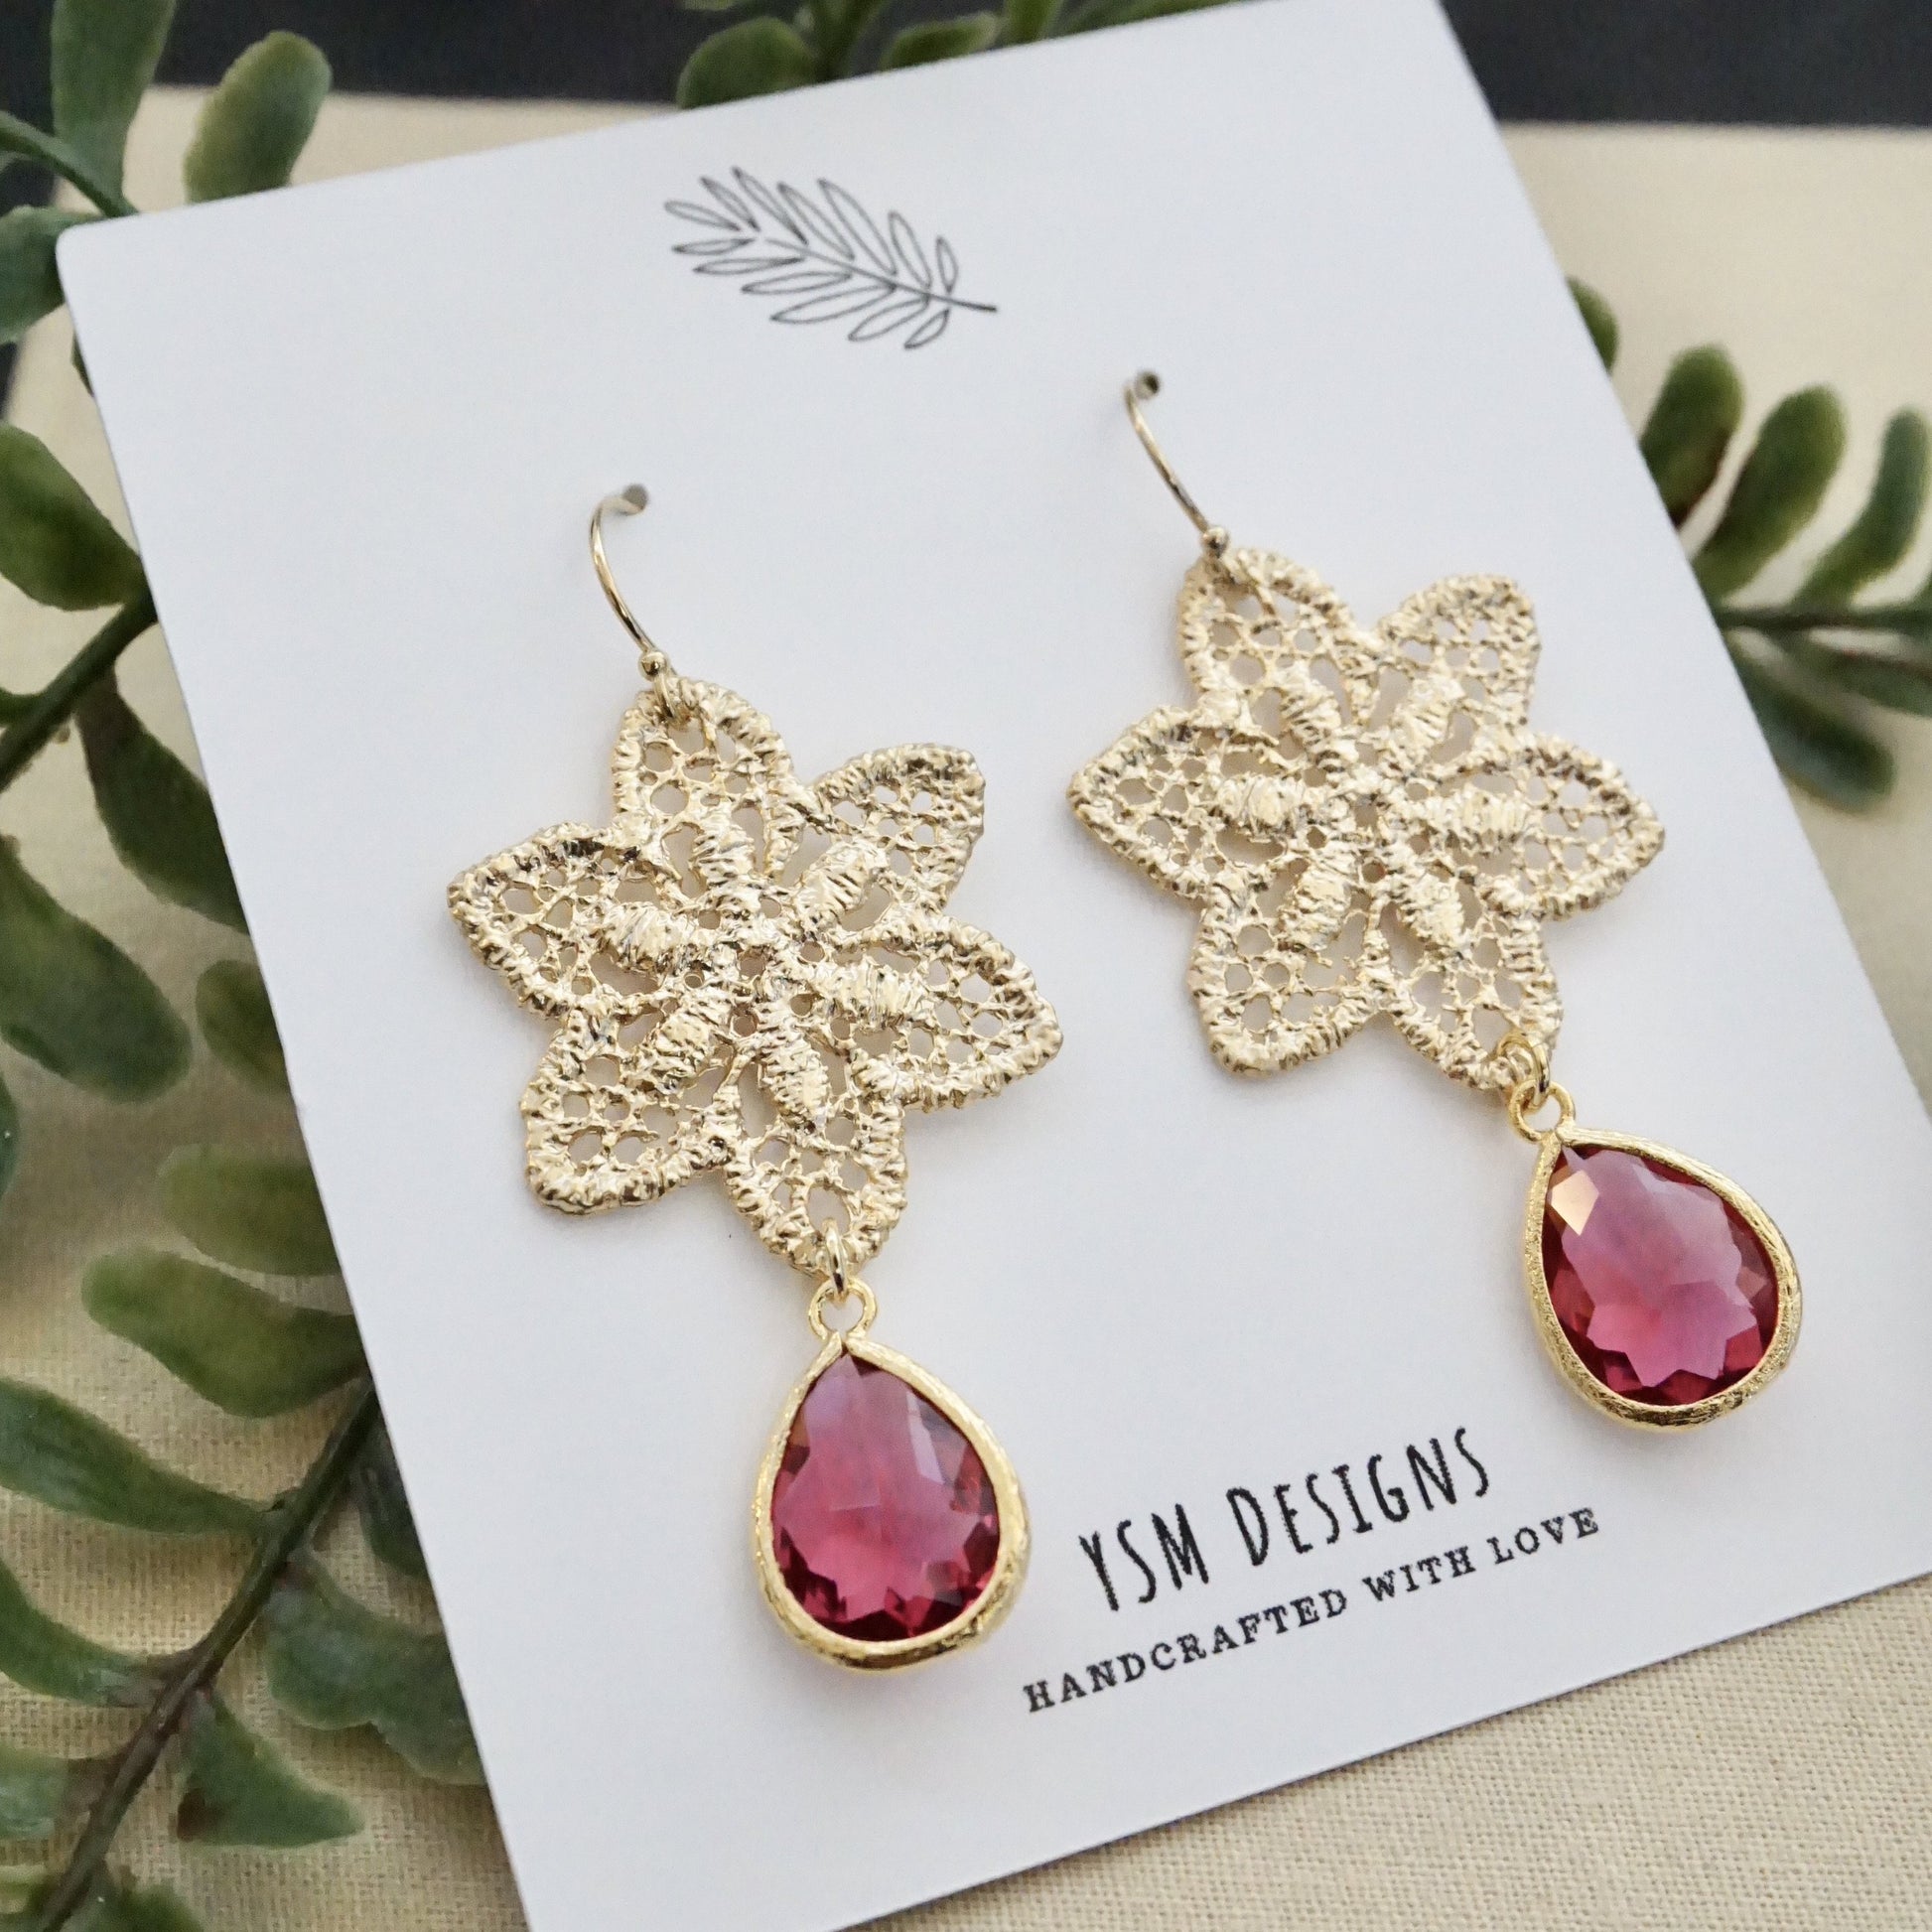 Red Holiday Earrings featuring poinsettia with red stones